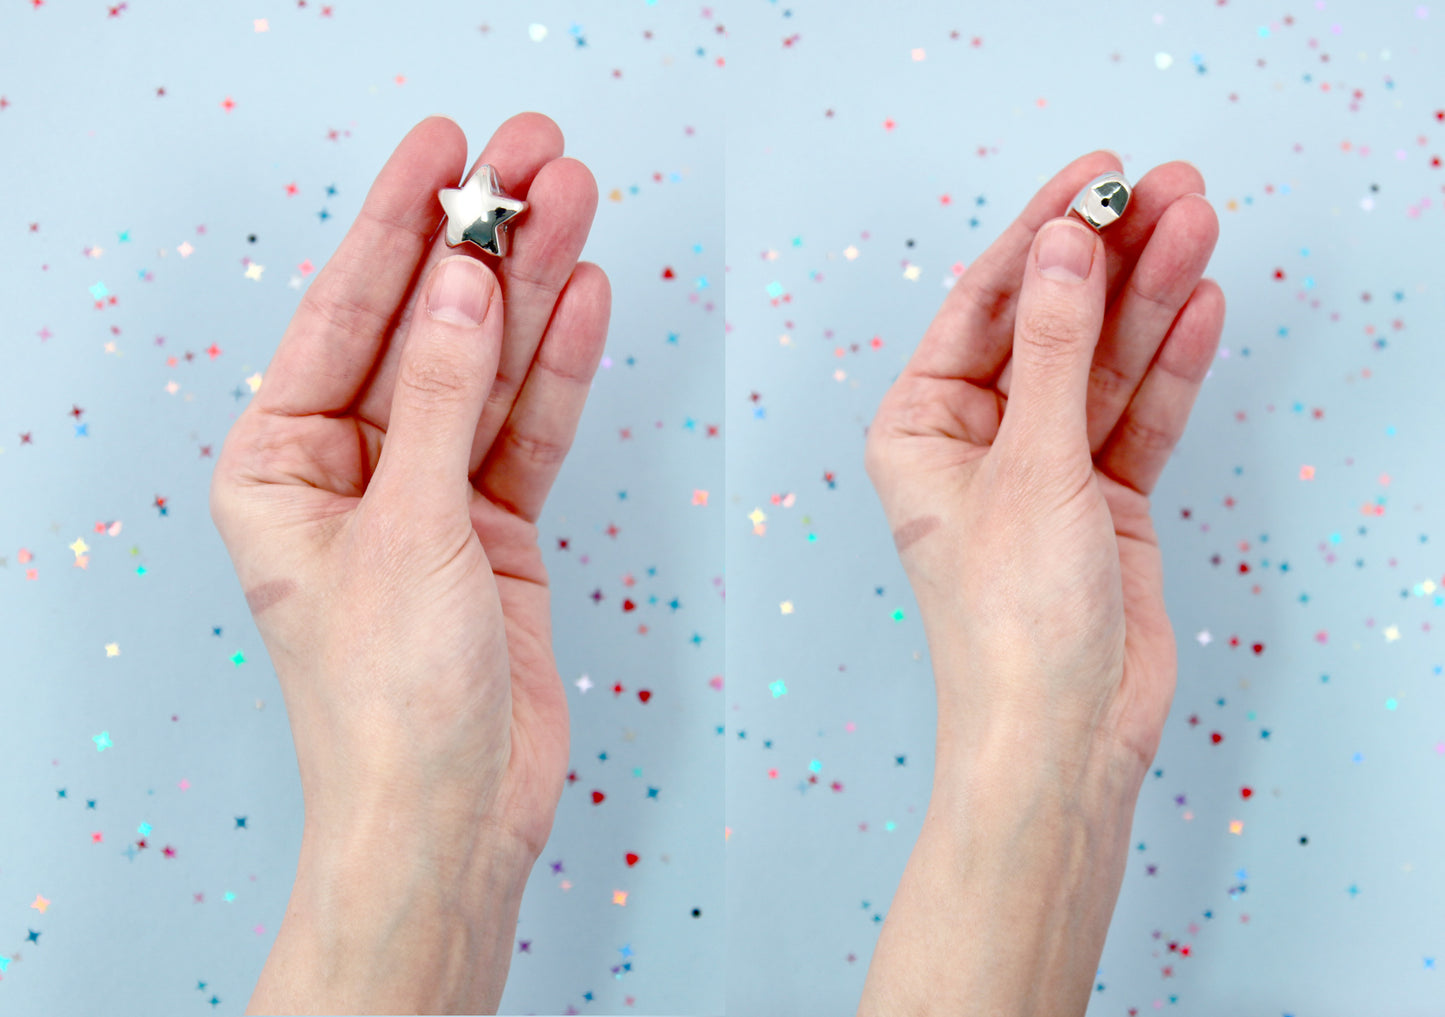 Silver Star Beads - 18 pcs - 17mm 3D Puffy Star Bead - Electroplated Silver - Easily make any kind of jewelry